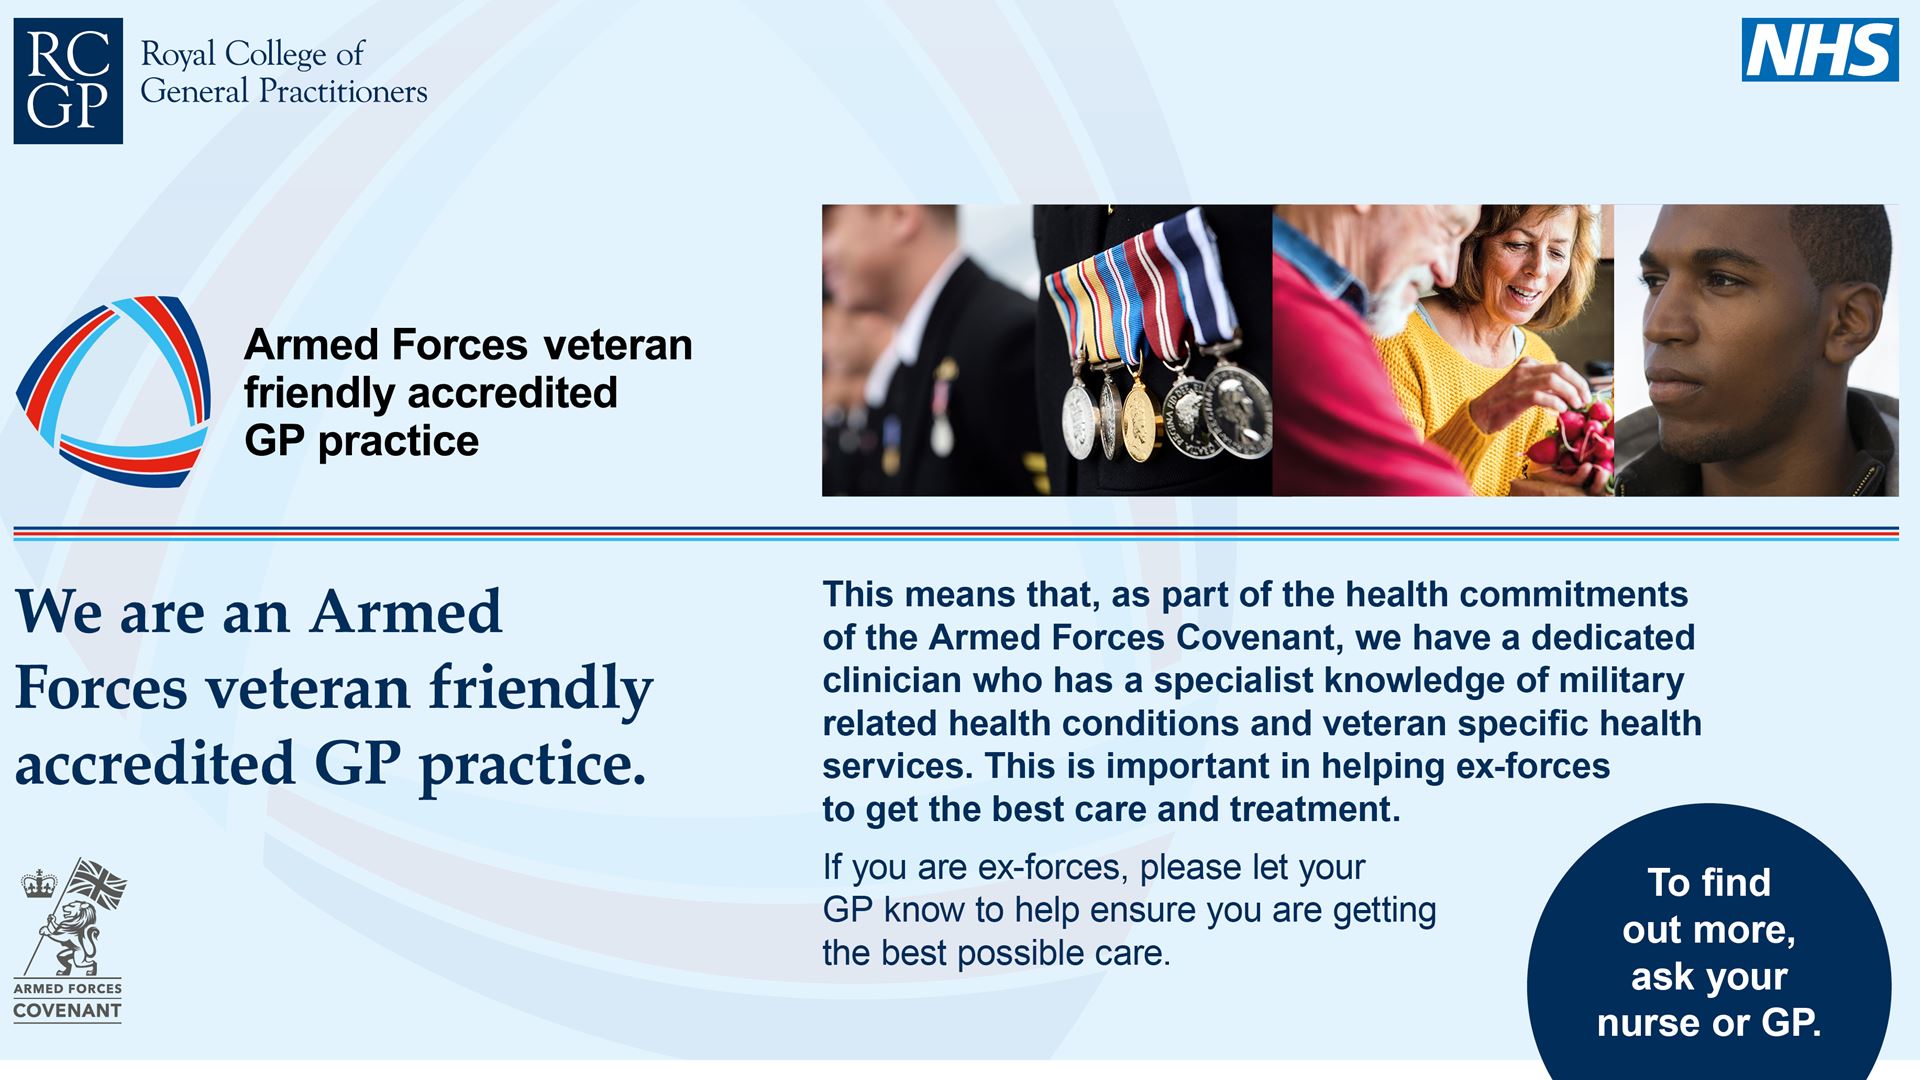 We are an Armed Forces veteran friendly GP practice